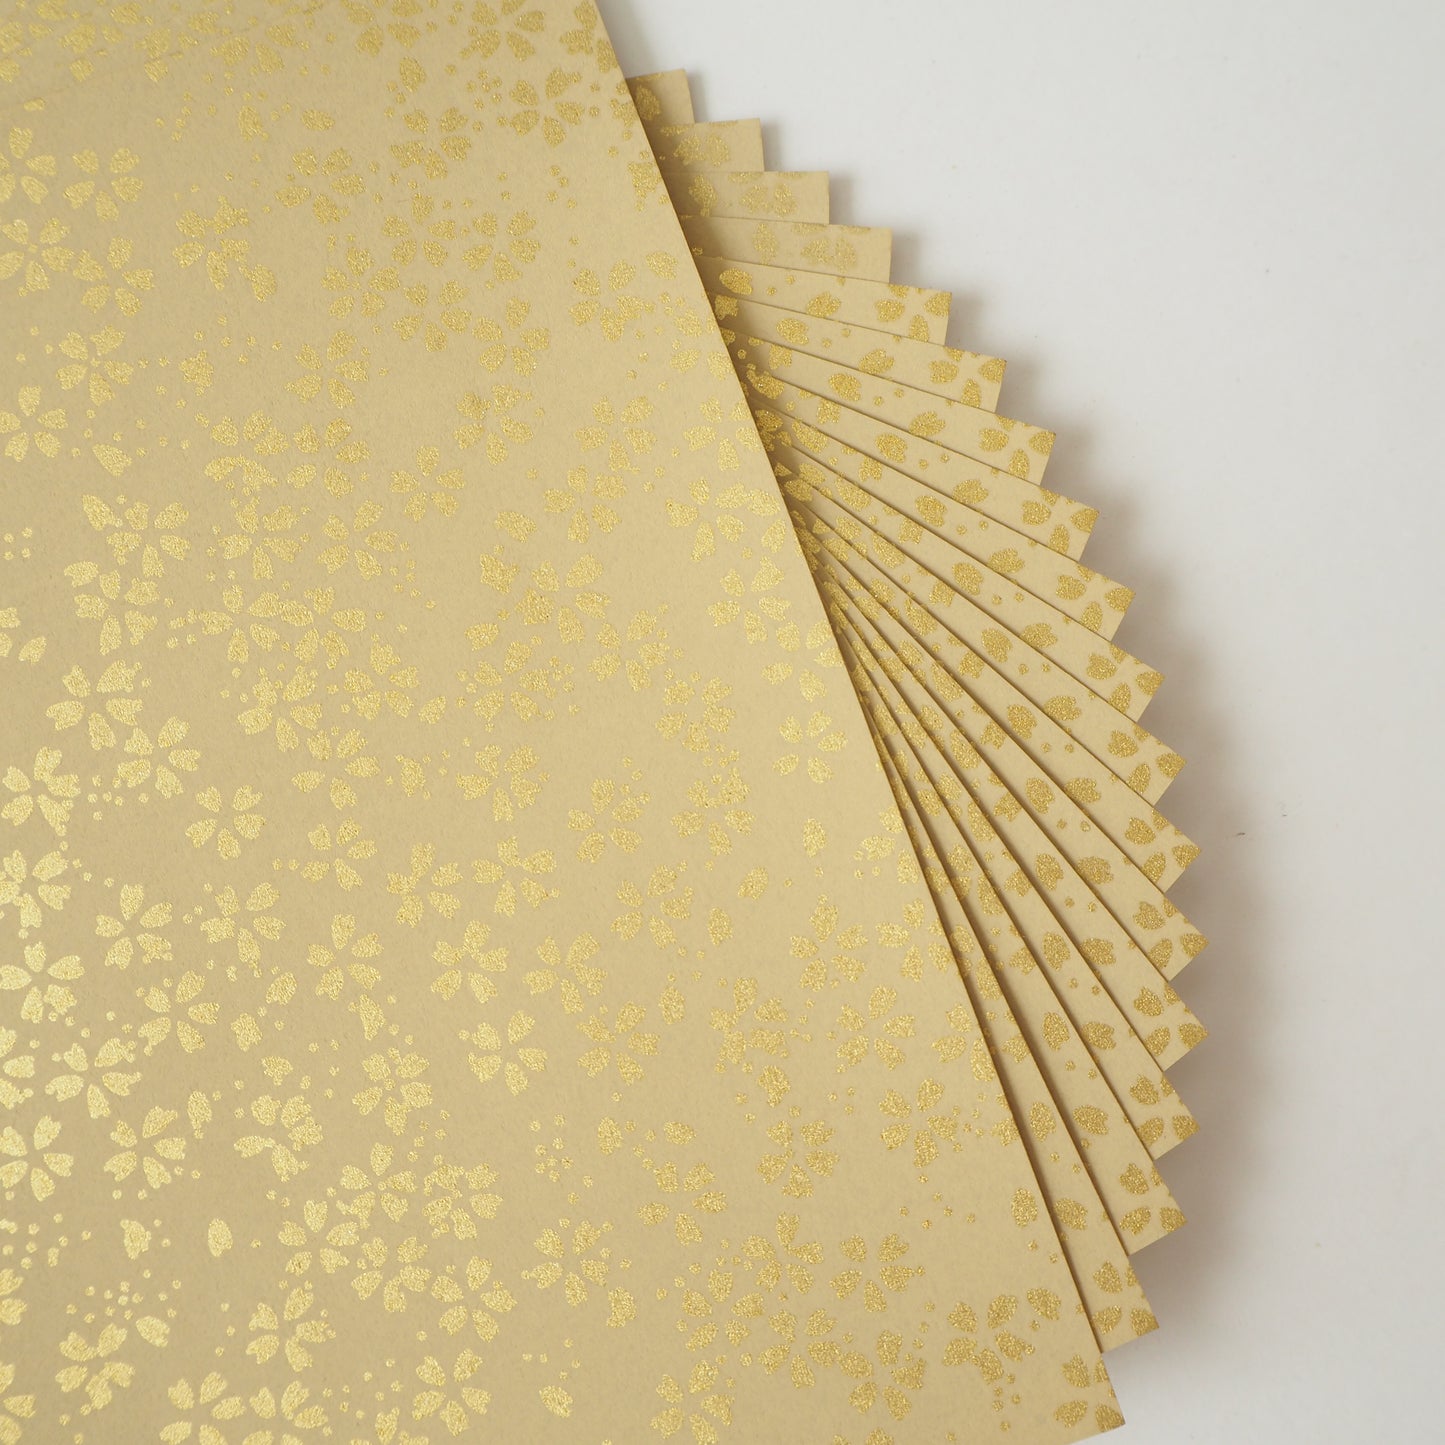 Pack of 20 Sheets 14x14cm Yuzen Washi Origami Paper HZ-092 - Small Gold Cherry Blossom